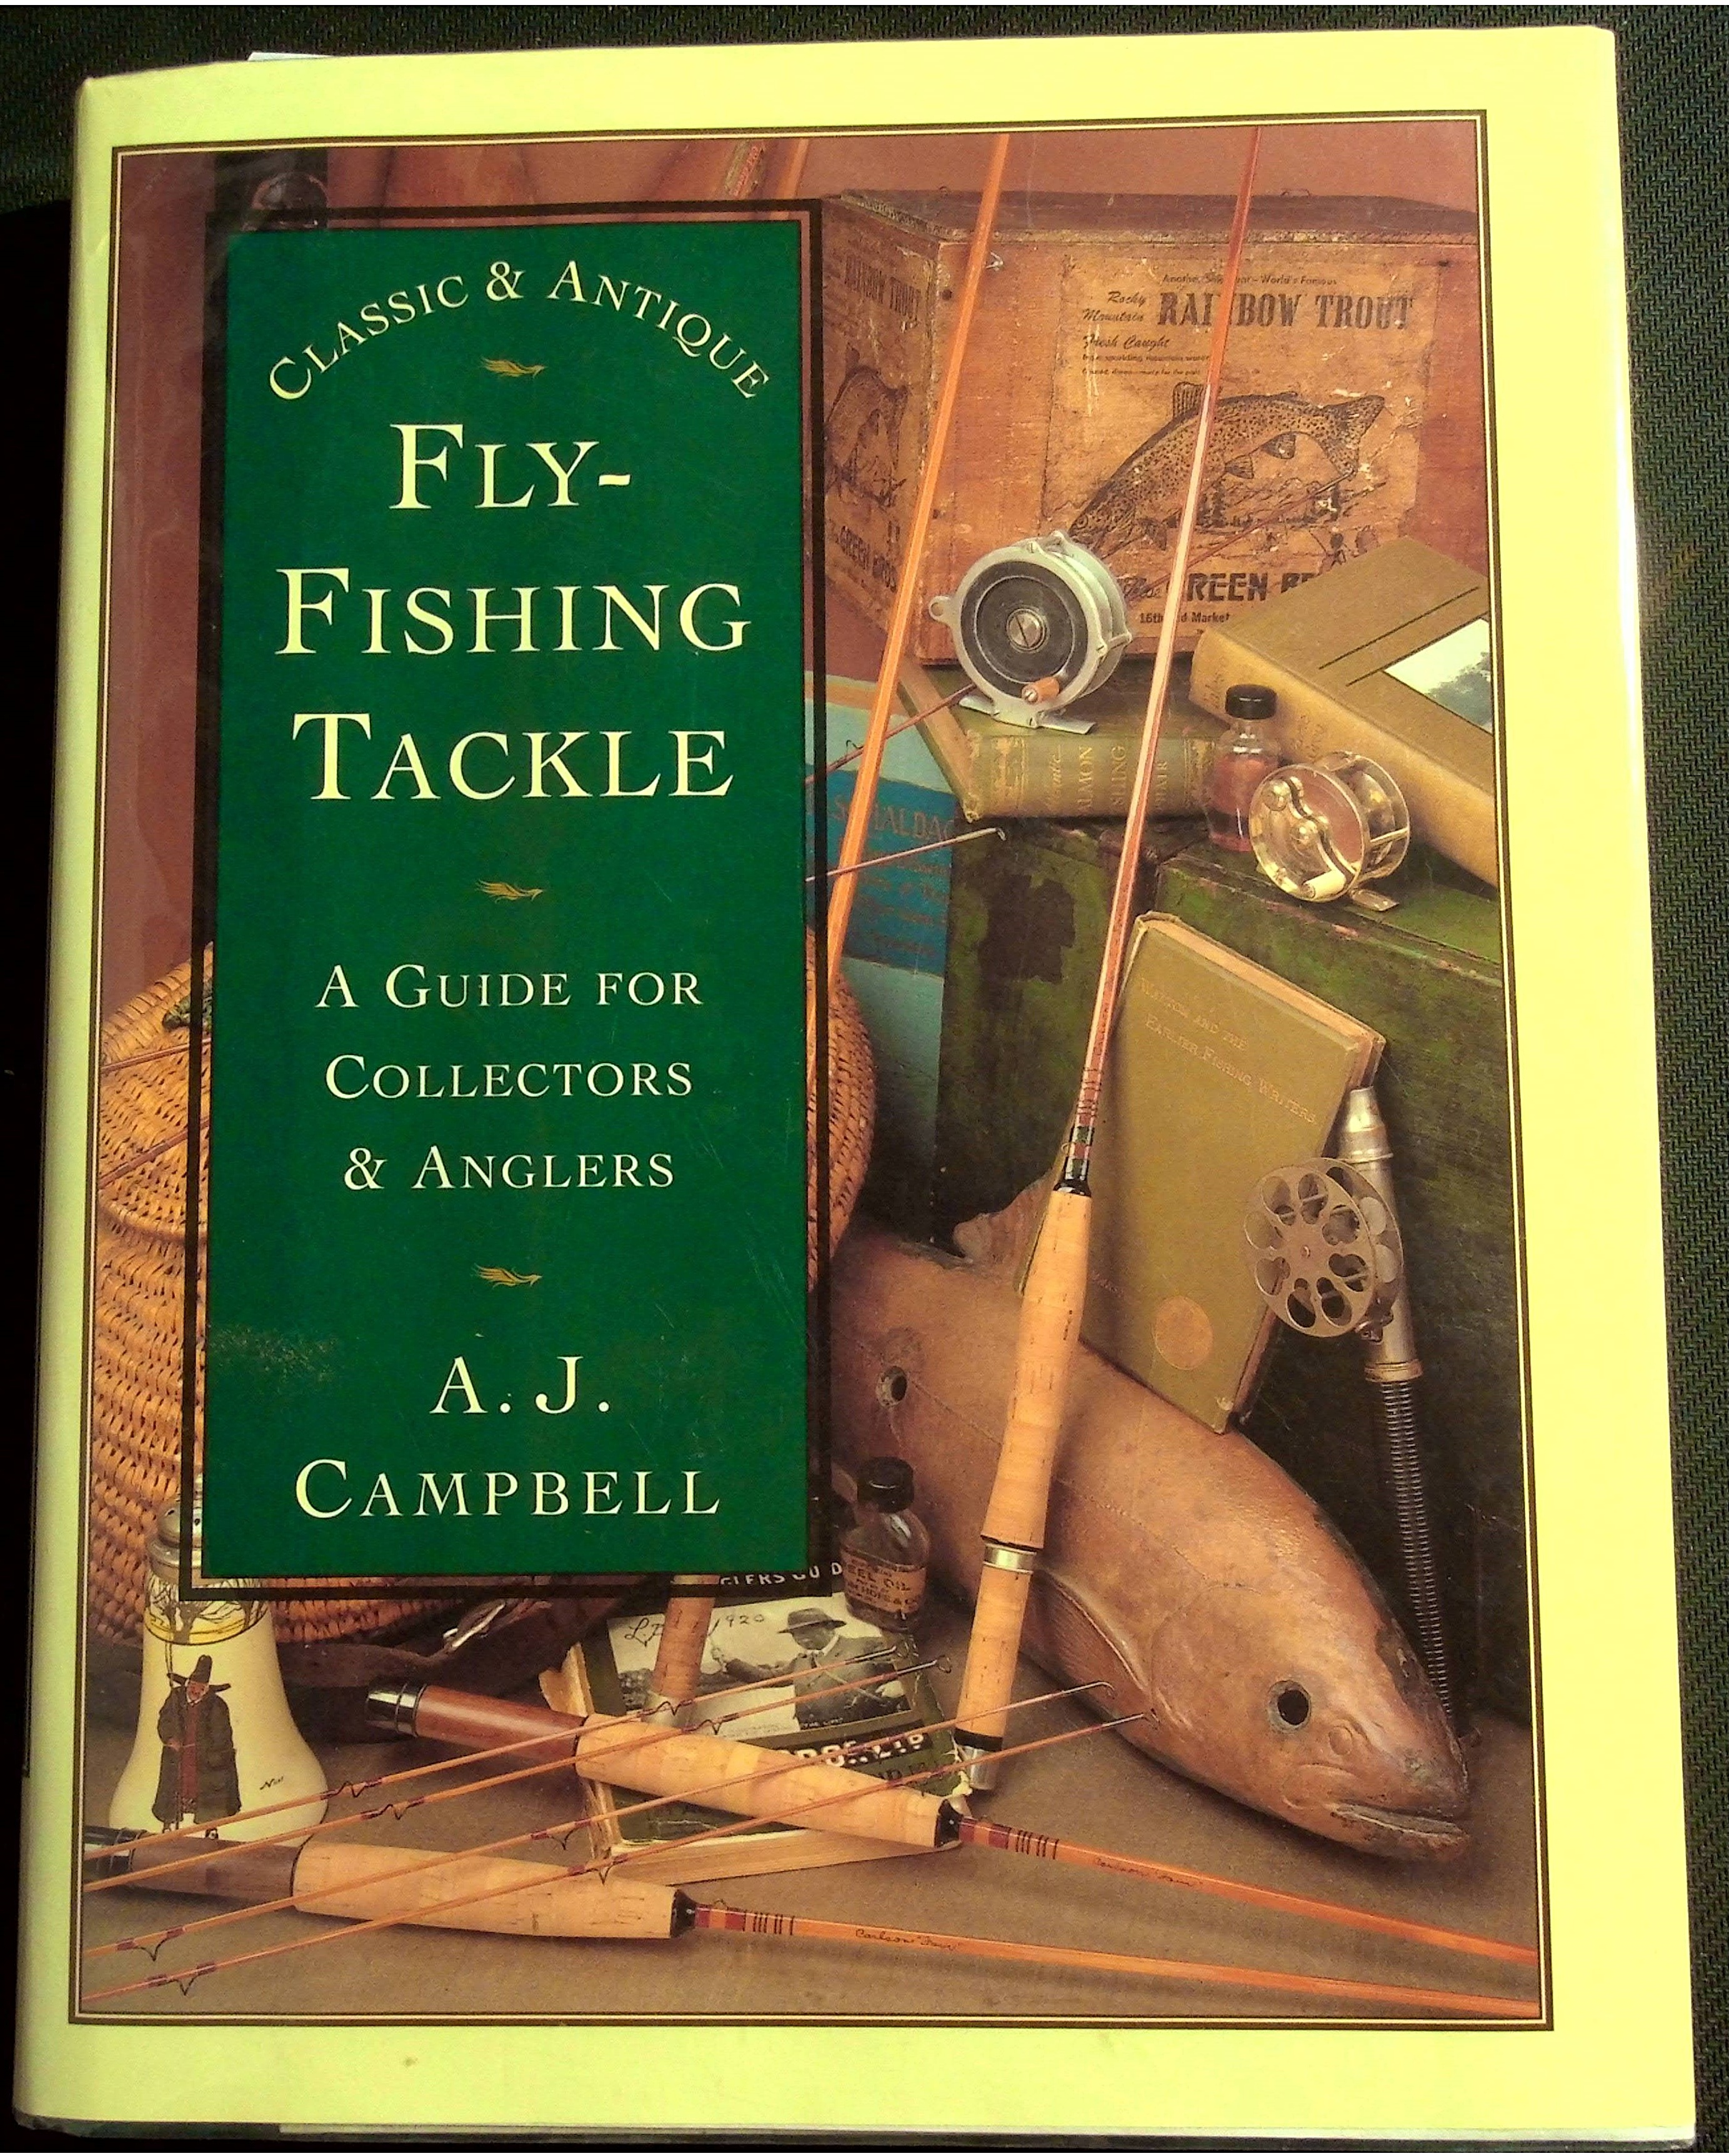 Classic & Antique Fly Fishing Tackle A Guide